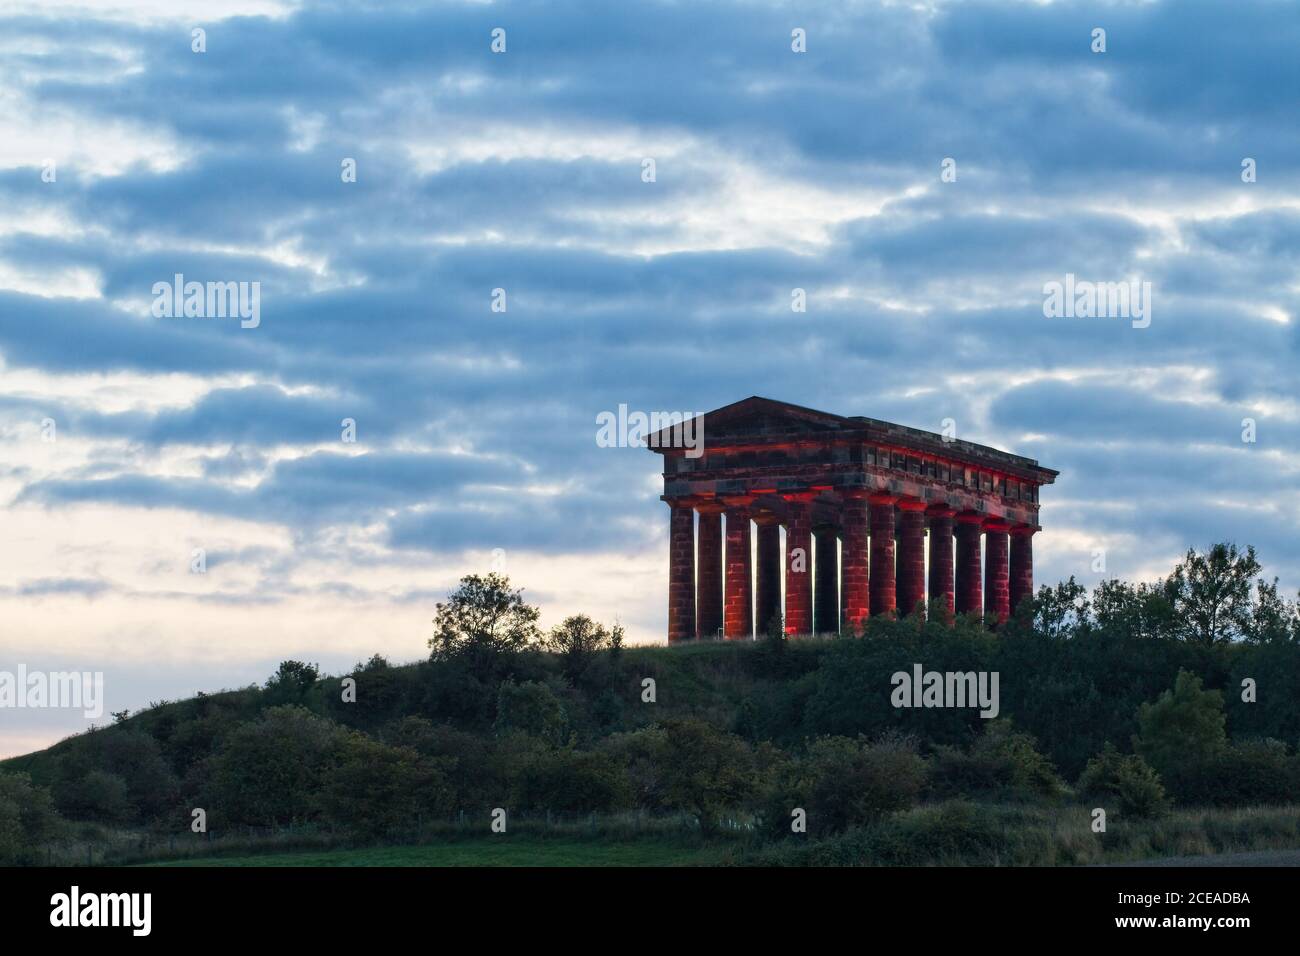 The landmark Earl of Durham Monument stands on a hilltop near Penshaw in County Durham. Image captured at dusk. Stock Photo